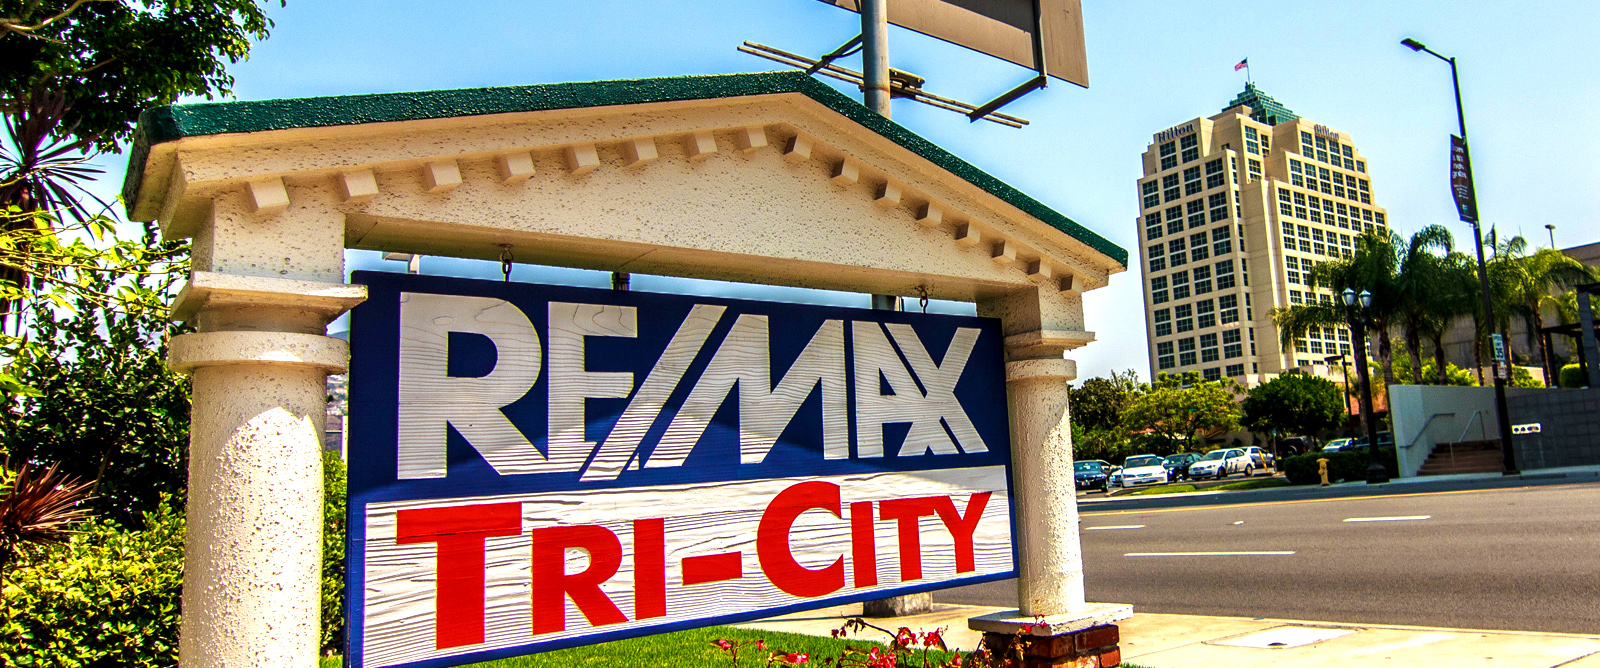 Slide 3 - RE/MAX TriCity